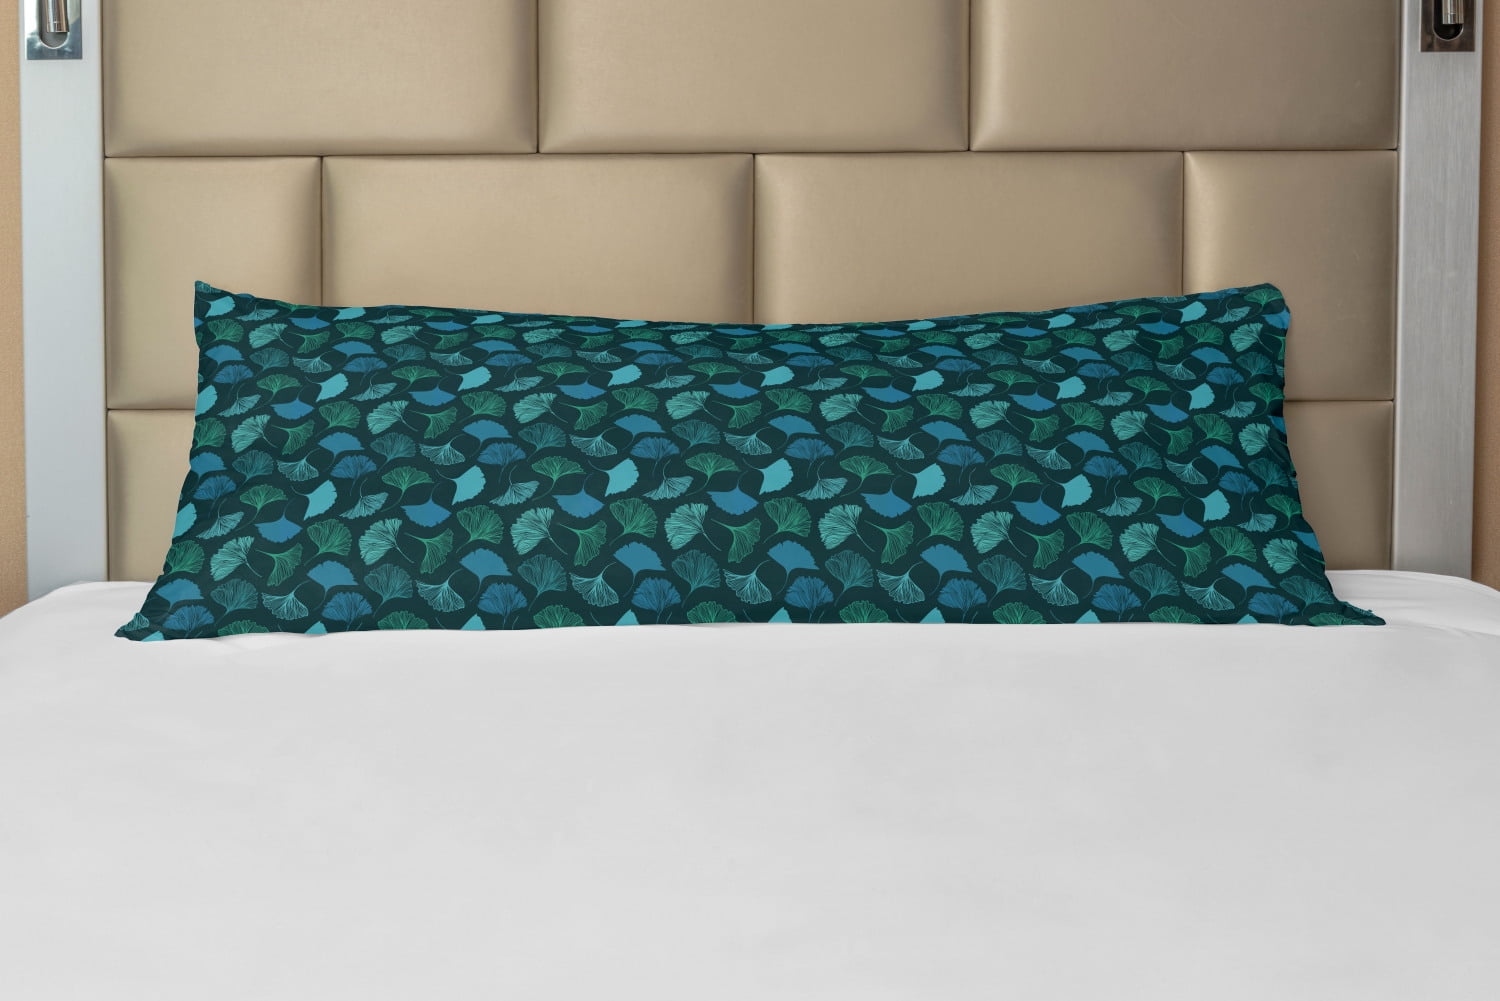 New/Quality/Aqua/Turquoise/Pillowcase/Case/Cover for 54" Body Pillow/Cotton rich 